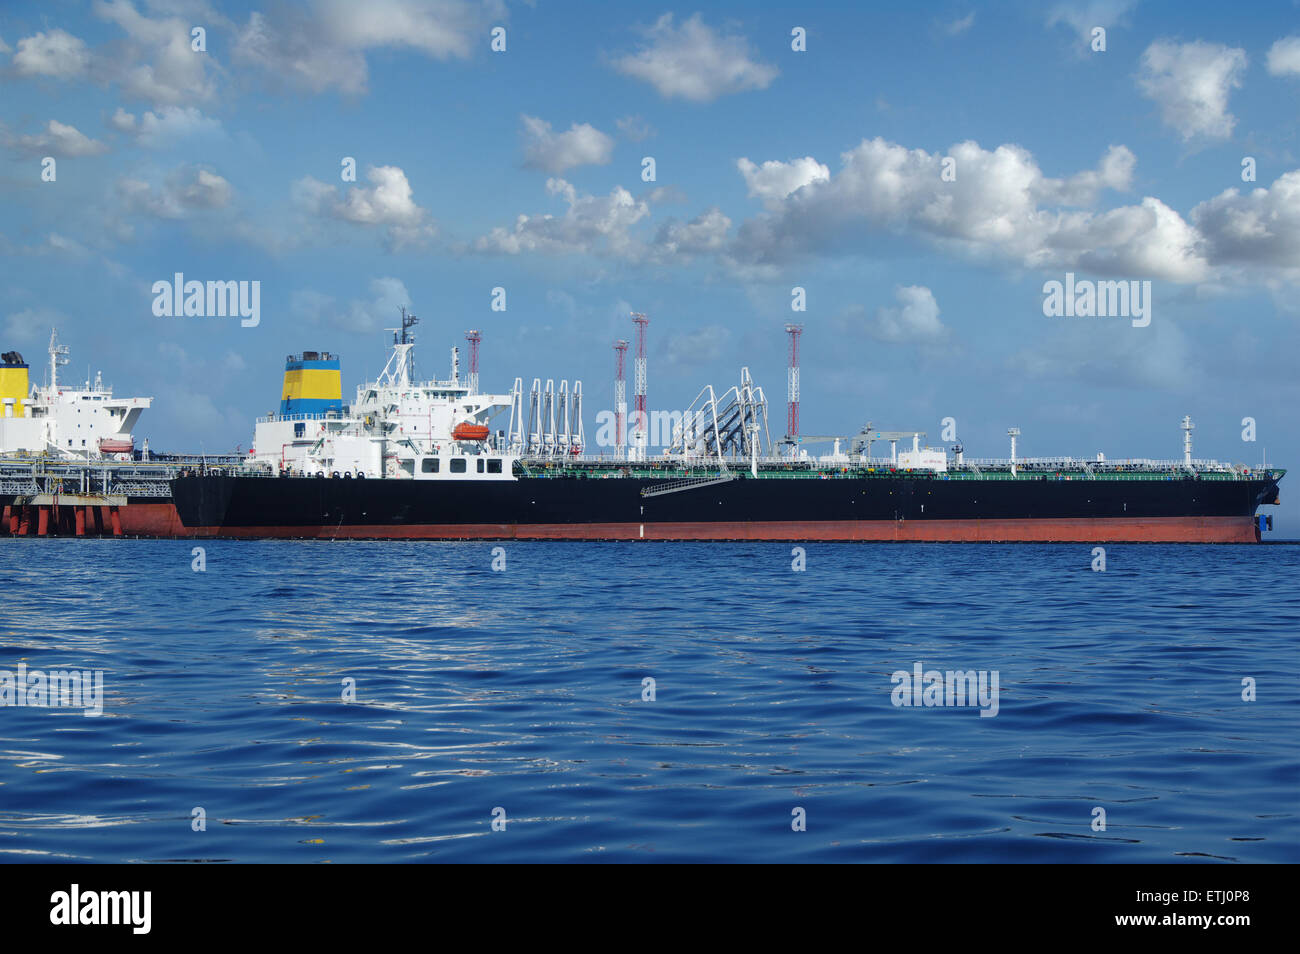 crude oil tanker is loading in the port on the background of clouds Stock Photo